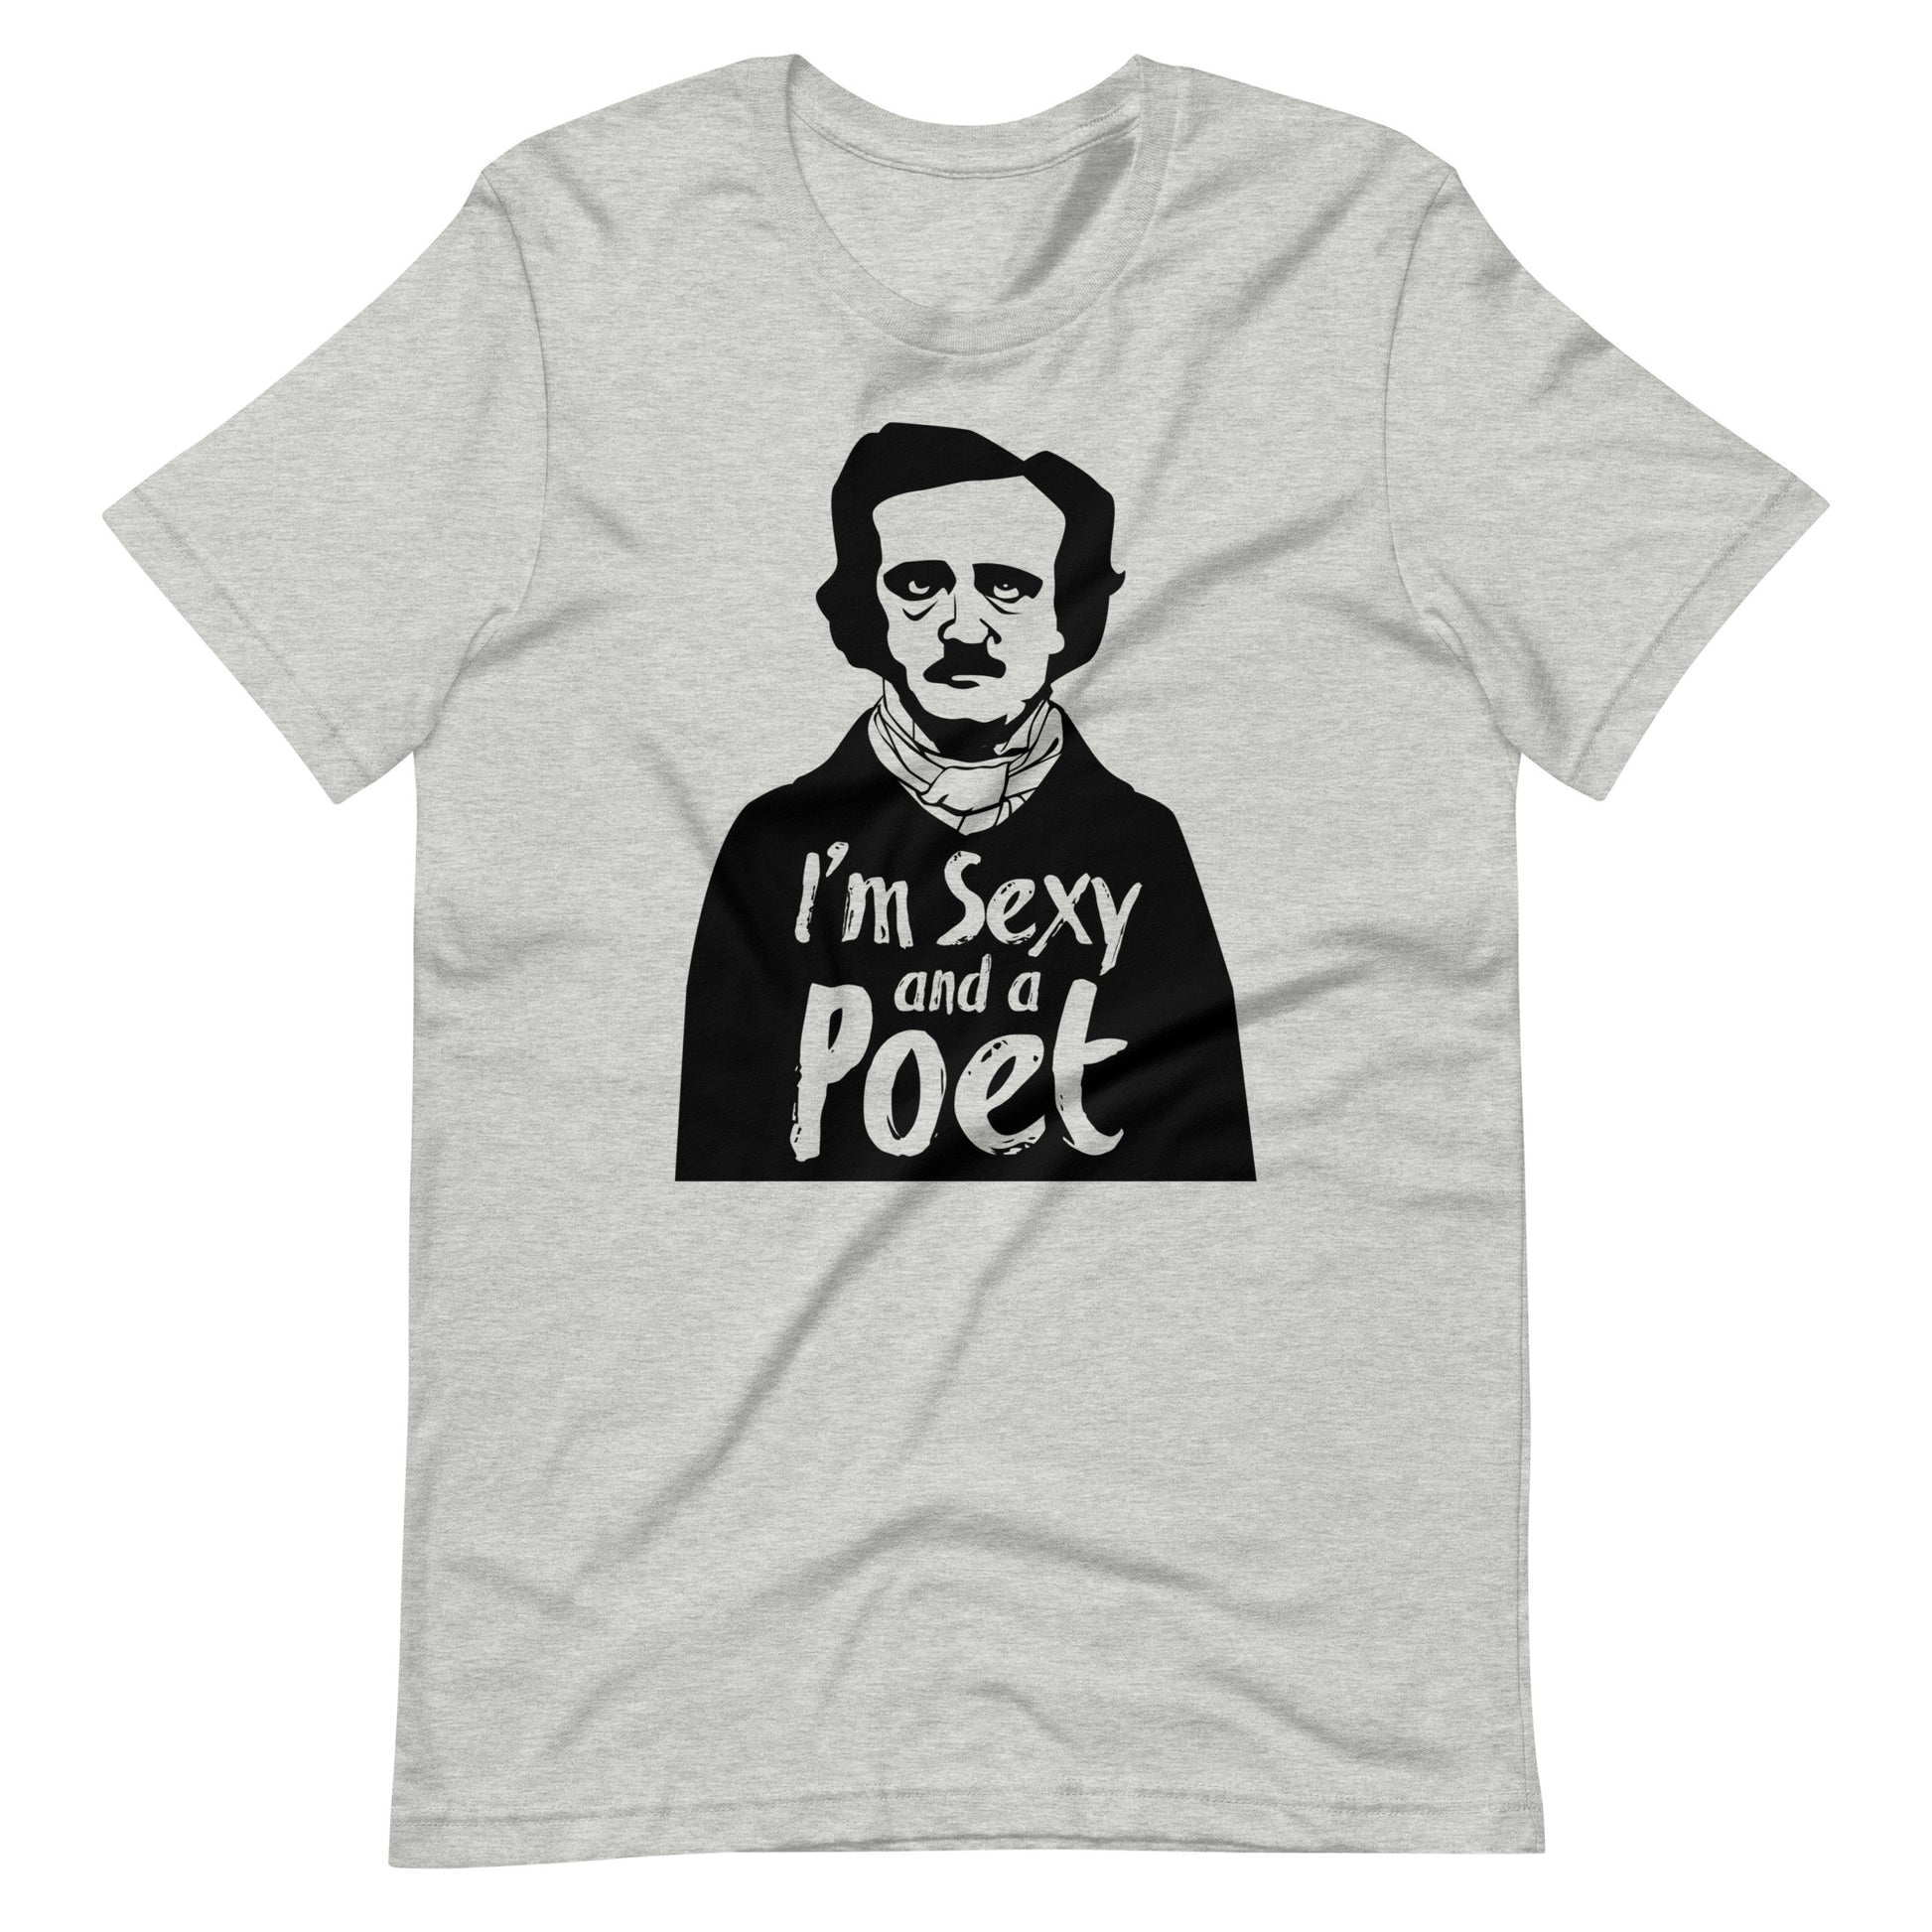 Women's Edgar Allan Poe "I'm Sexy and a Poet" t-shirt - Athletic Heather Front